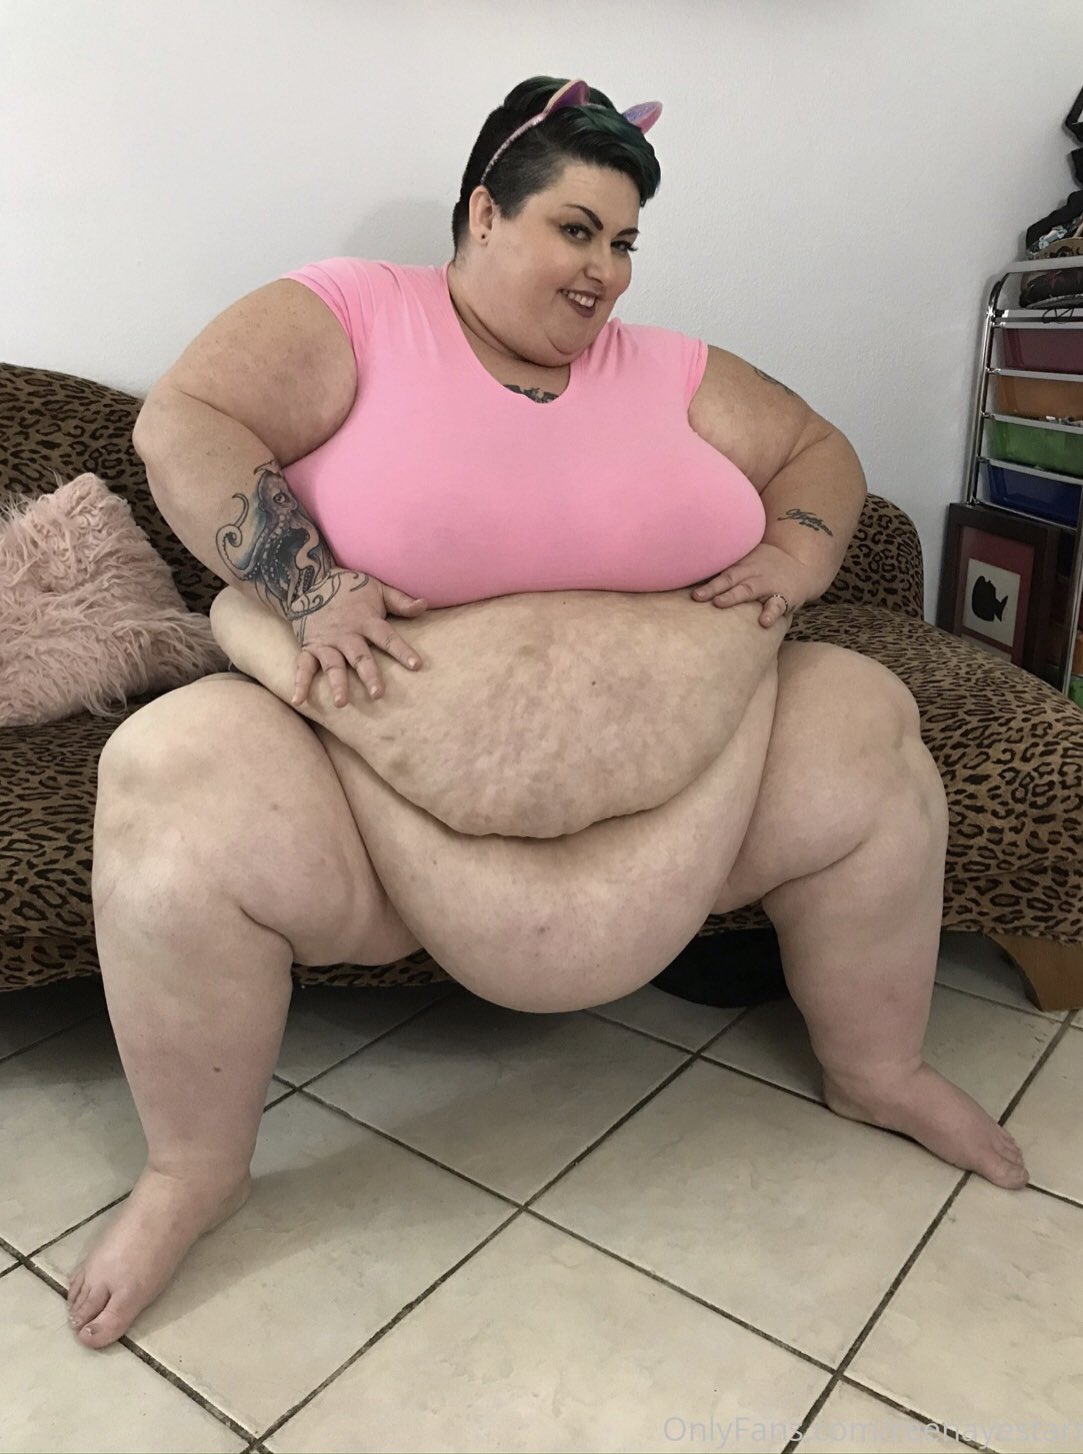 🌘Reenaye Starr🌒 ONLYFANS.comReenayeStarr on X: I posted the last of my  #SSBBW Pretty in Pink Piggy pics! These and more are waiting for you at  t.cowrqVxMYpRk t.coUY4FLIl3gb  X